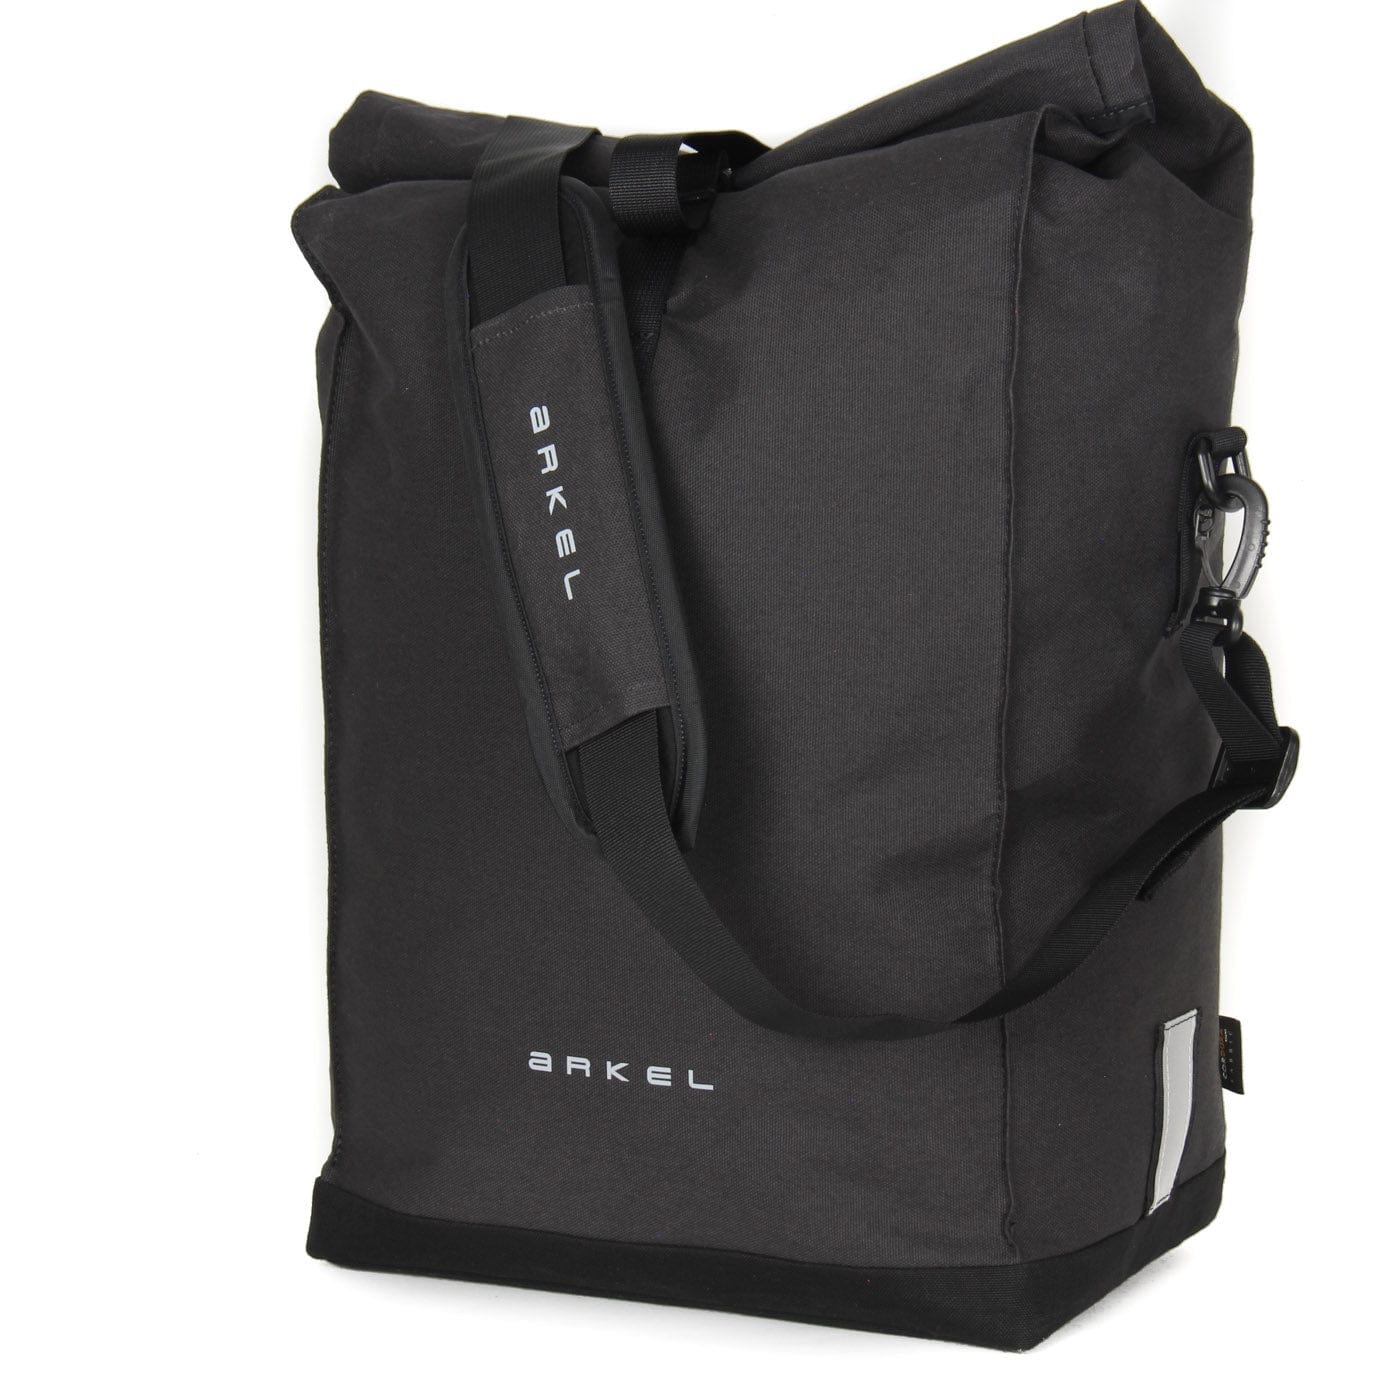 Signature V waterproof urban laptop pannier in Xpac X11 lux black color with shoulder strap for off the bike transport